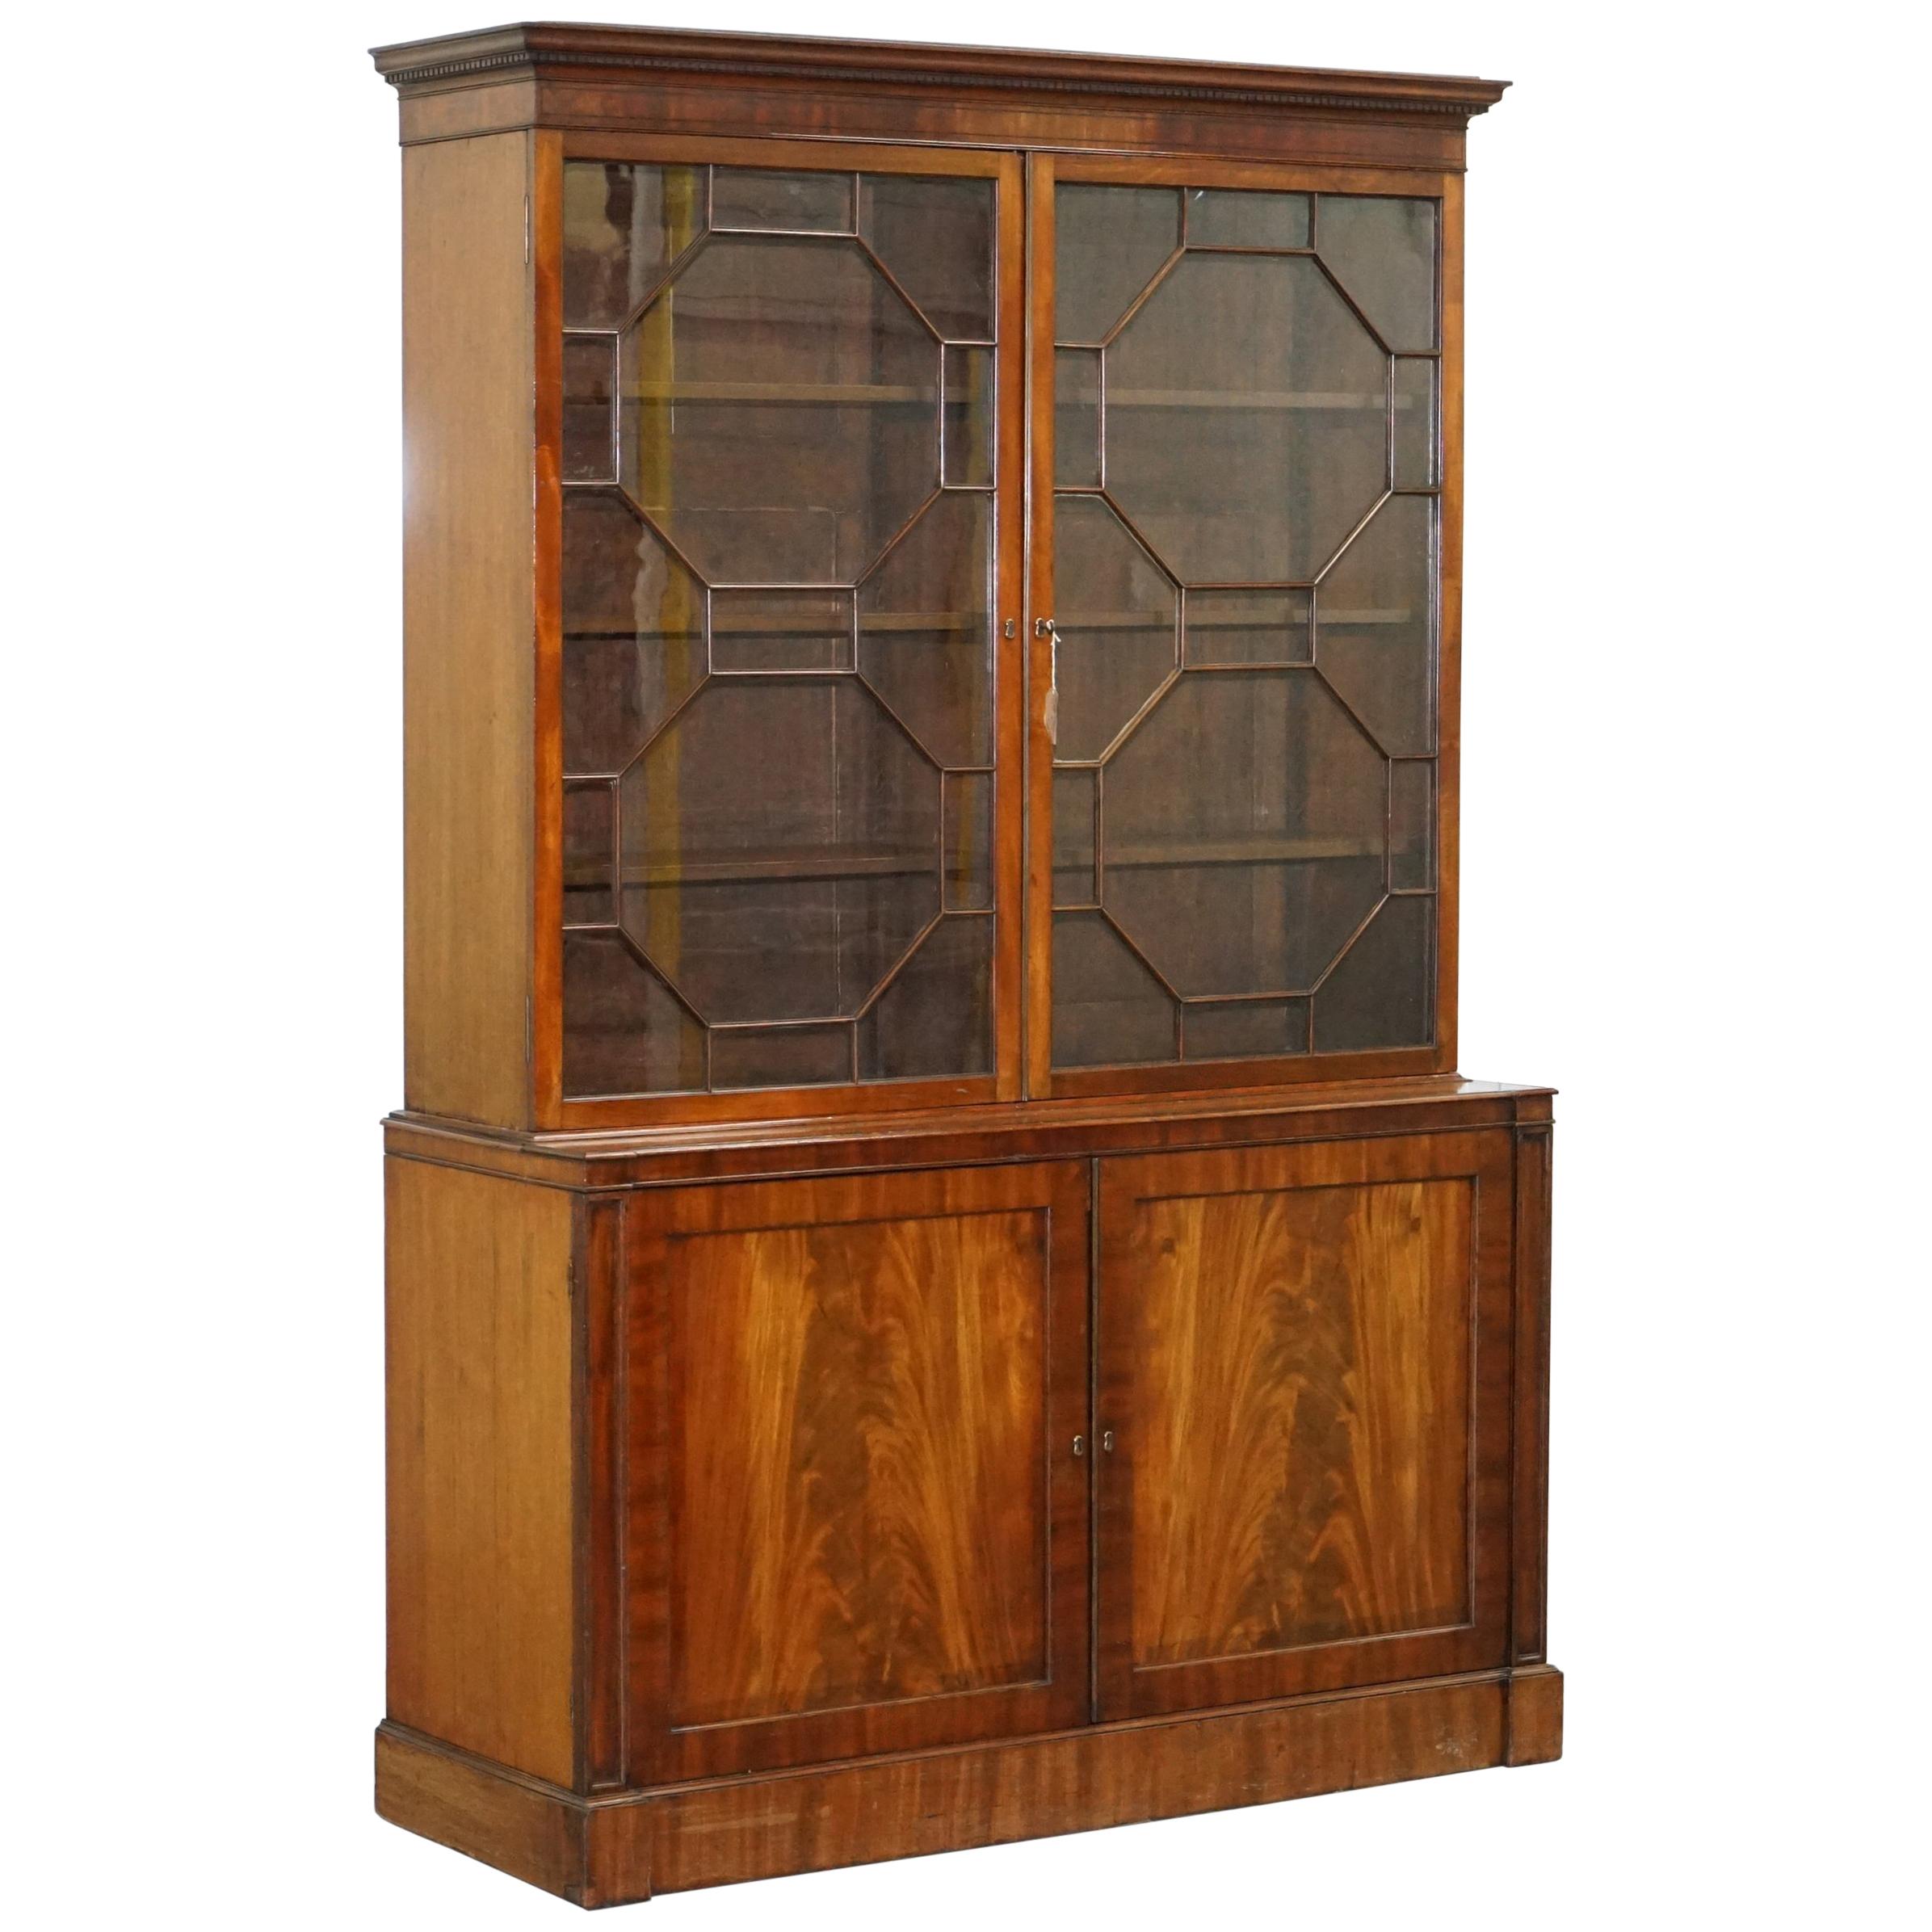 Very Rare Gillows Astral Glazed Mahogany Bookcase Cabinet Original Paper Labels